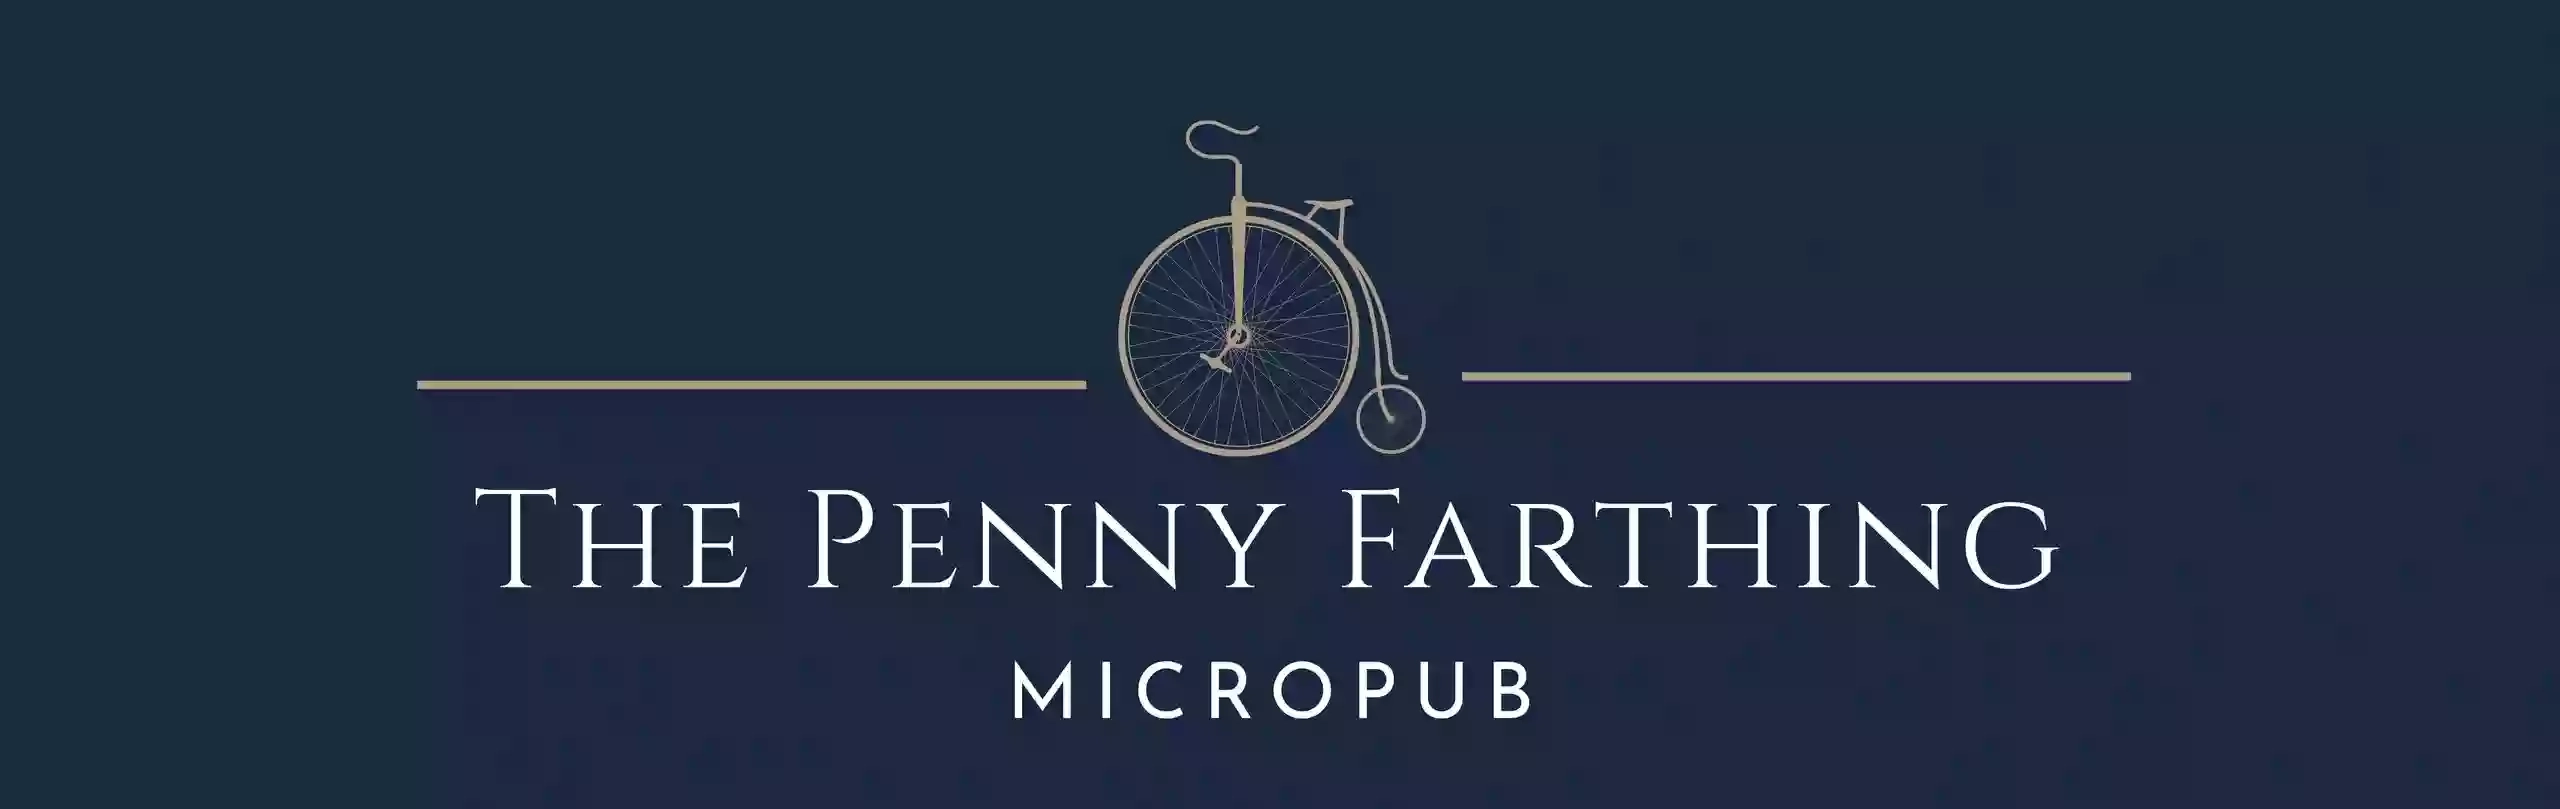 The Penny Farthing Micro-Pub